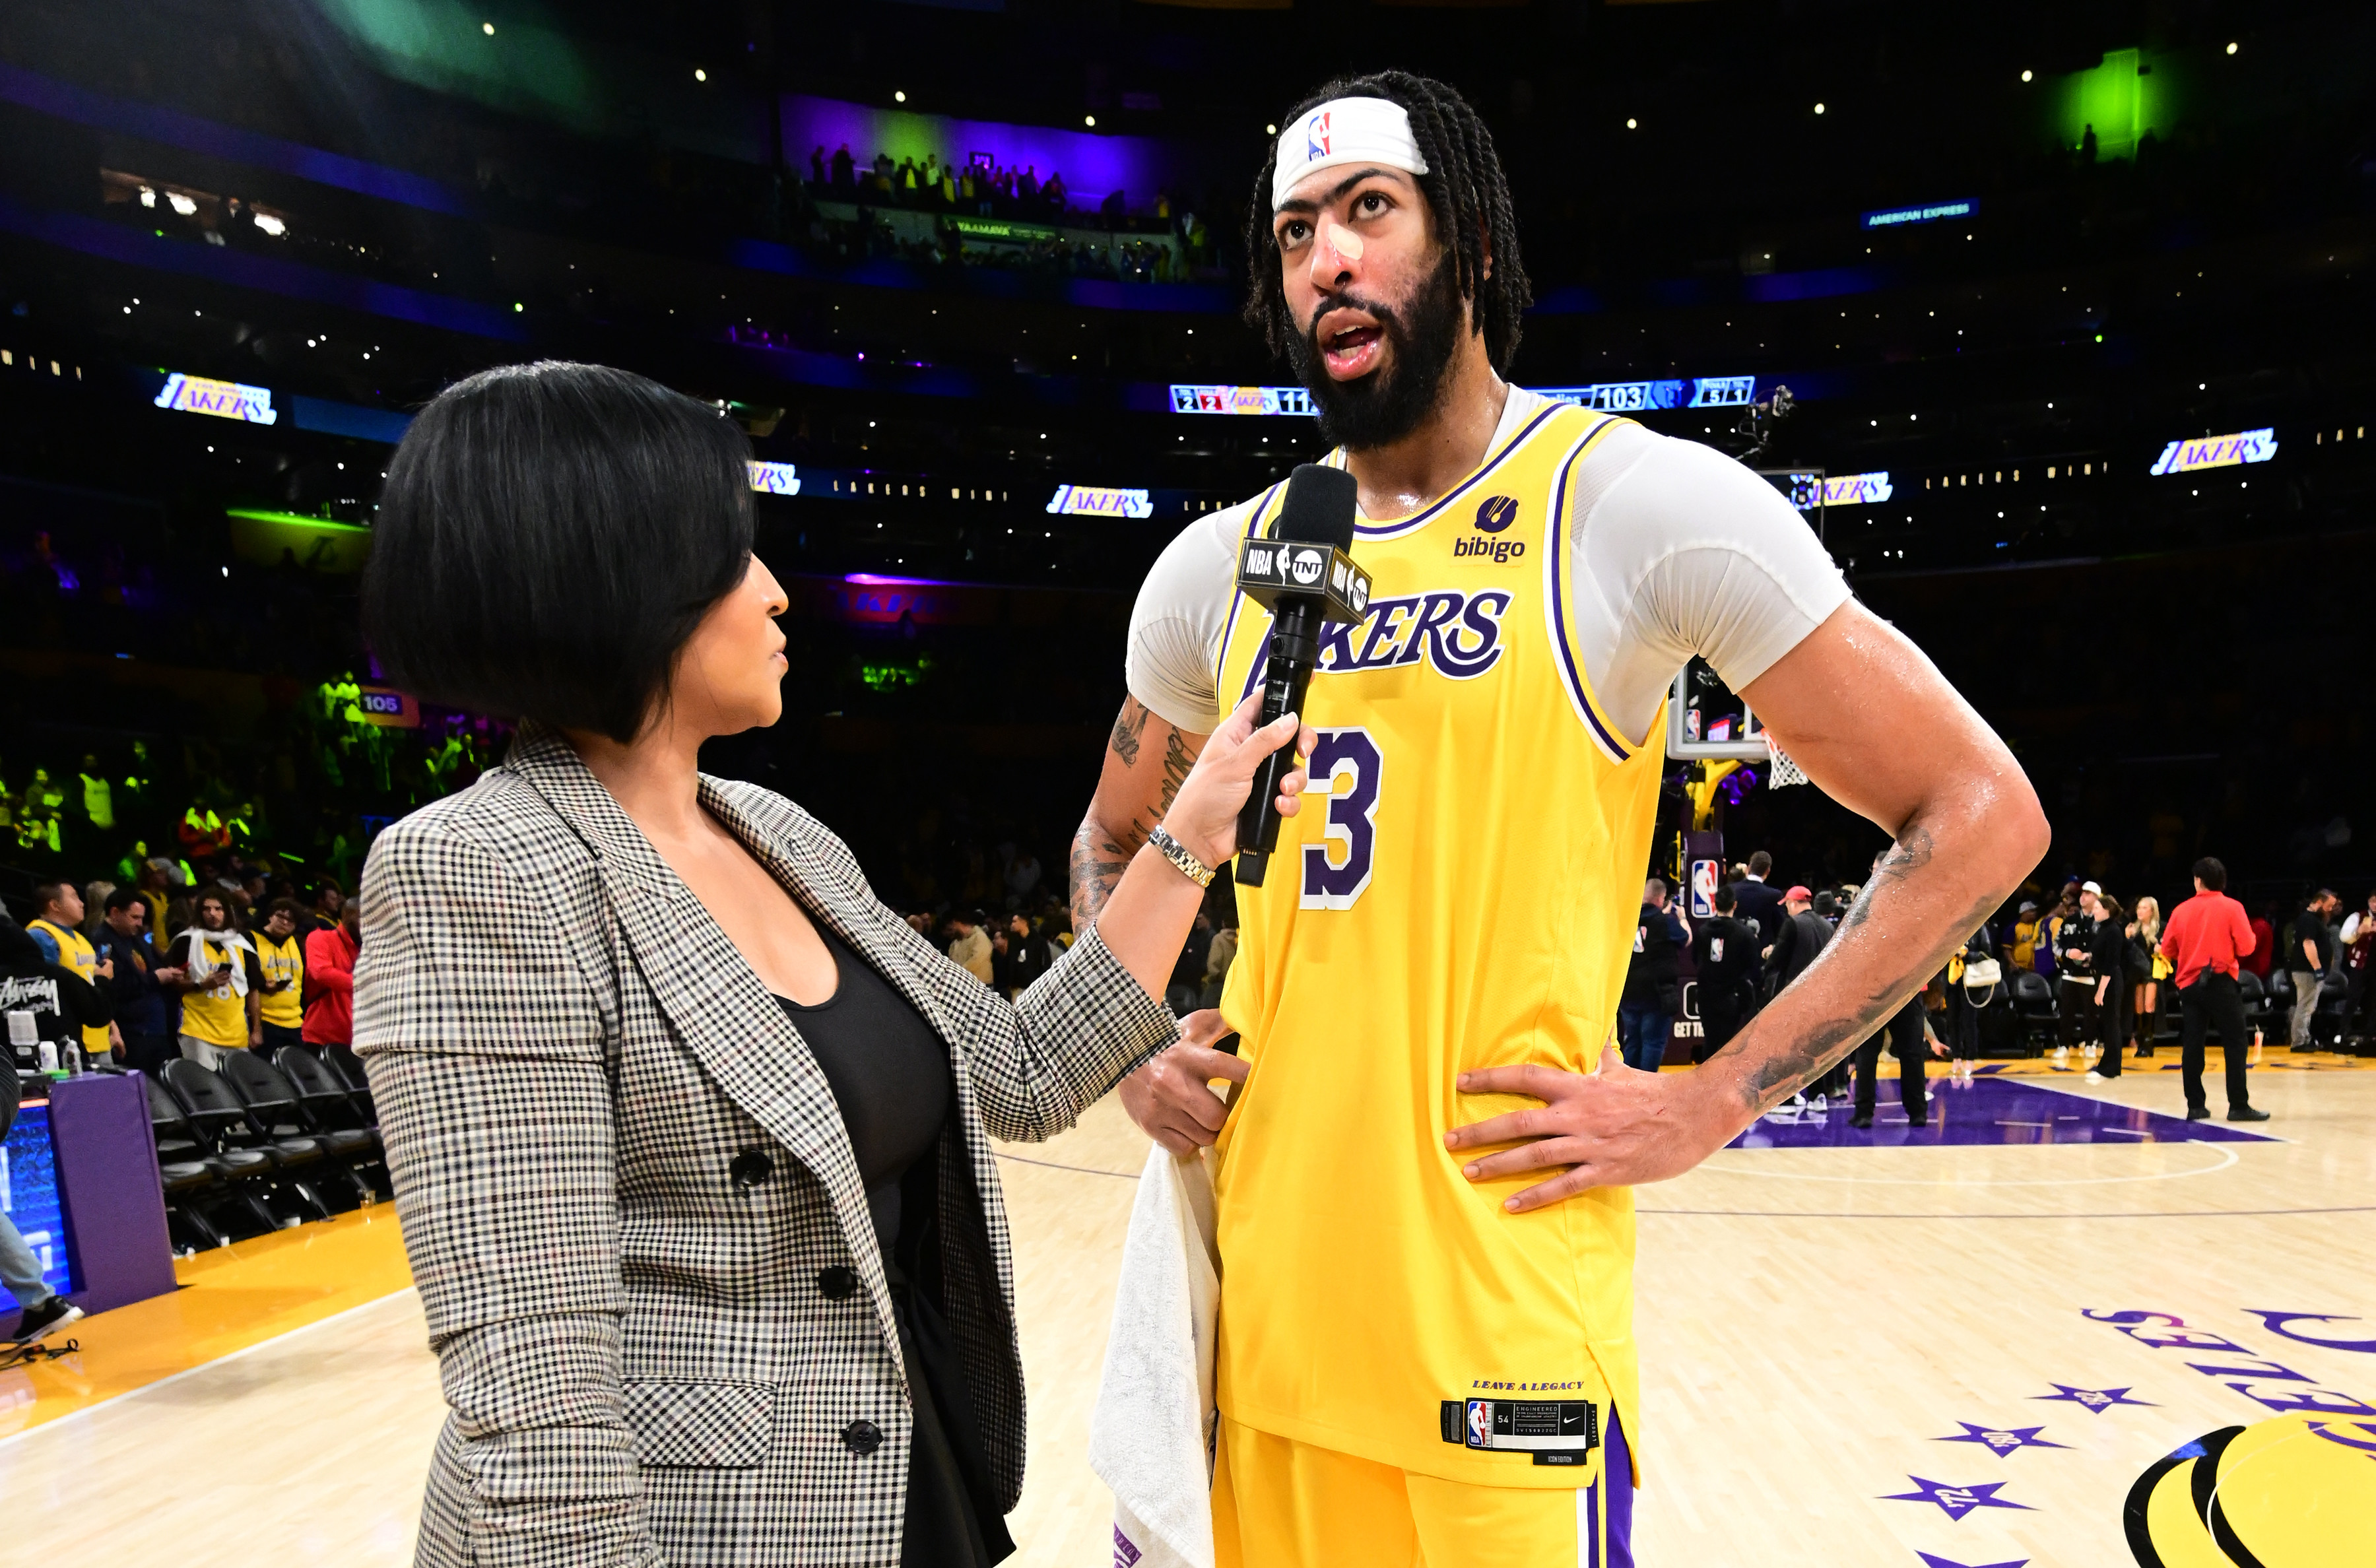 Anthony Davis plays big in Lakers' win over Grizzlies on night Pau Gasol's  jersey is retired, National Sports